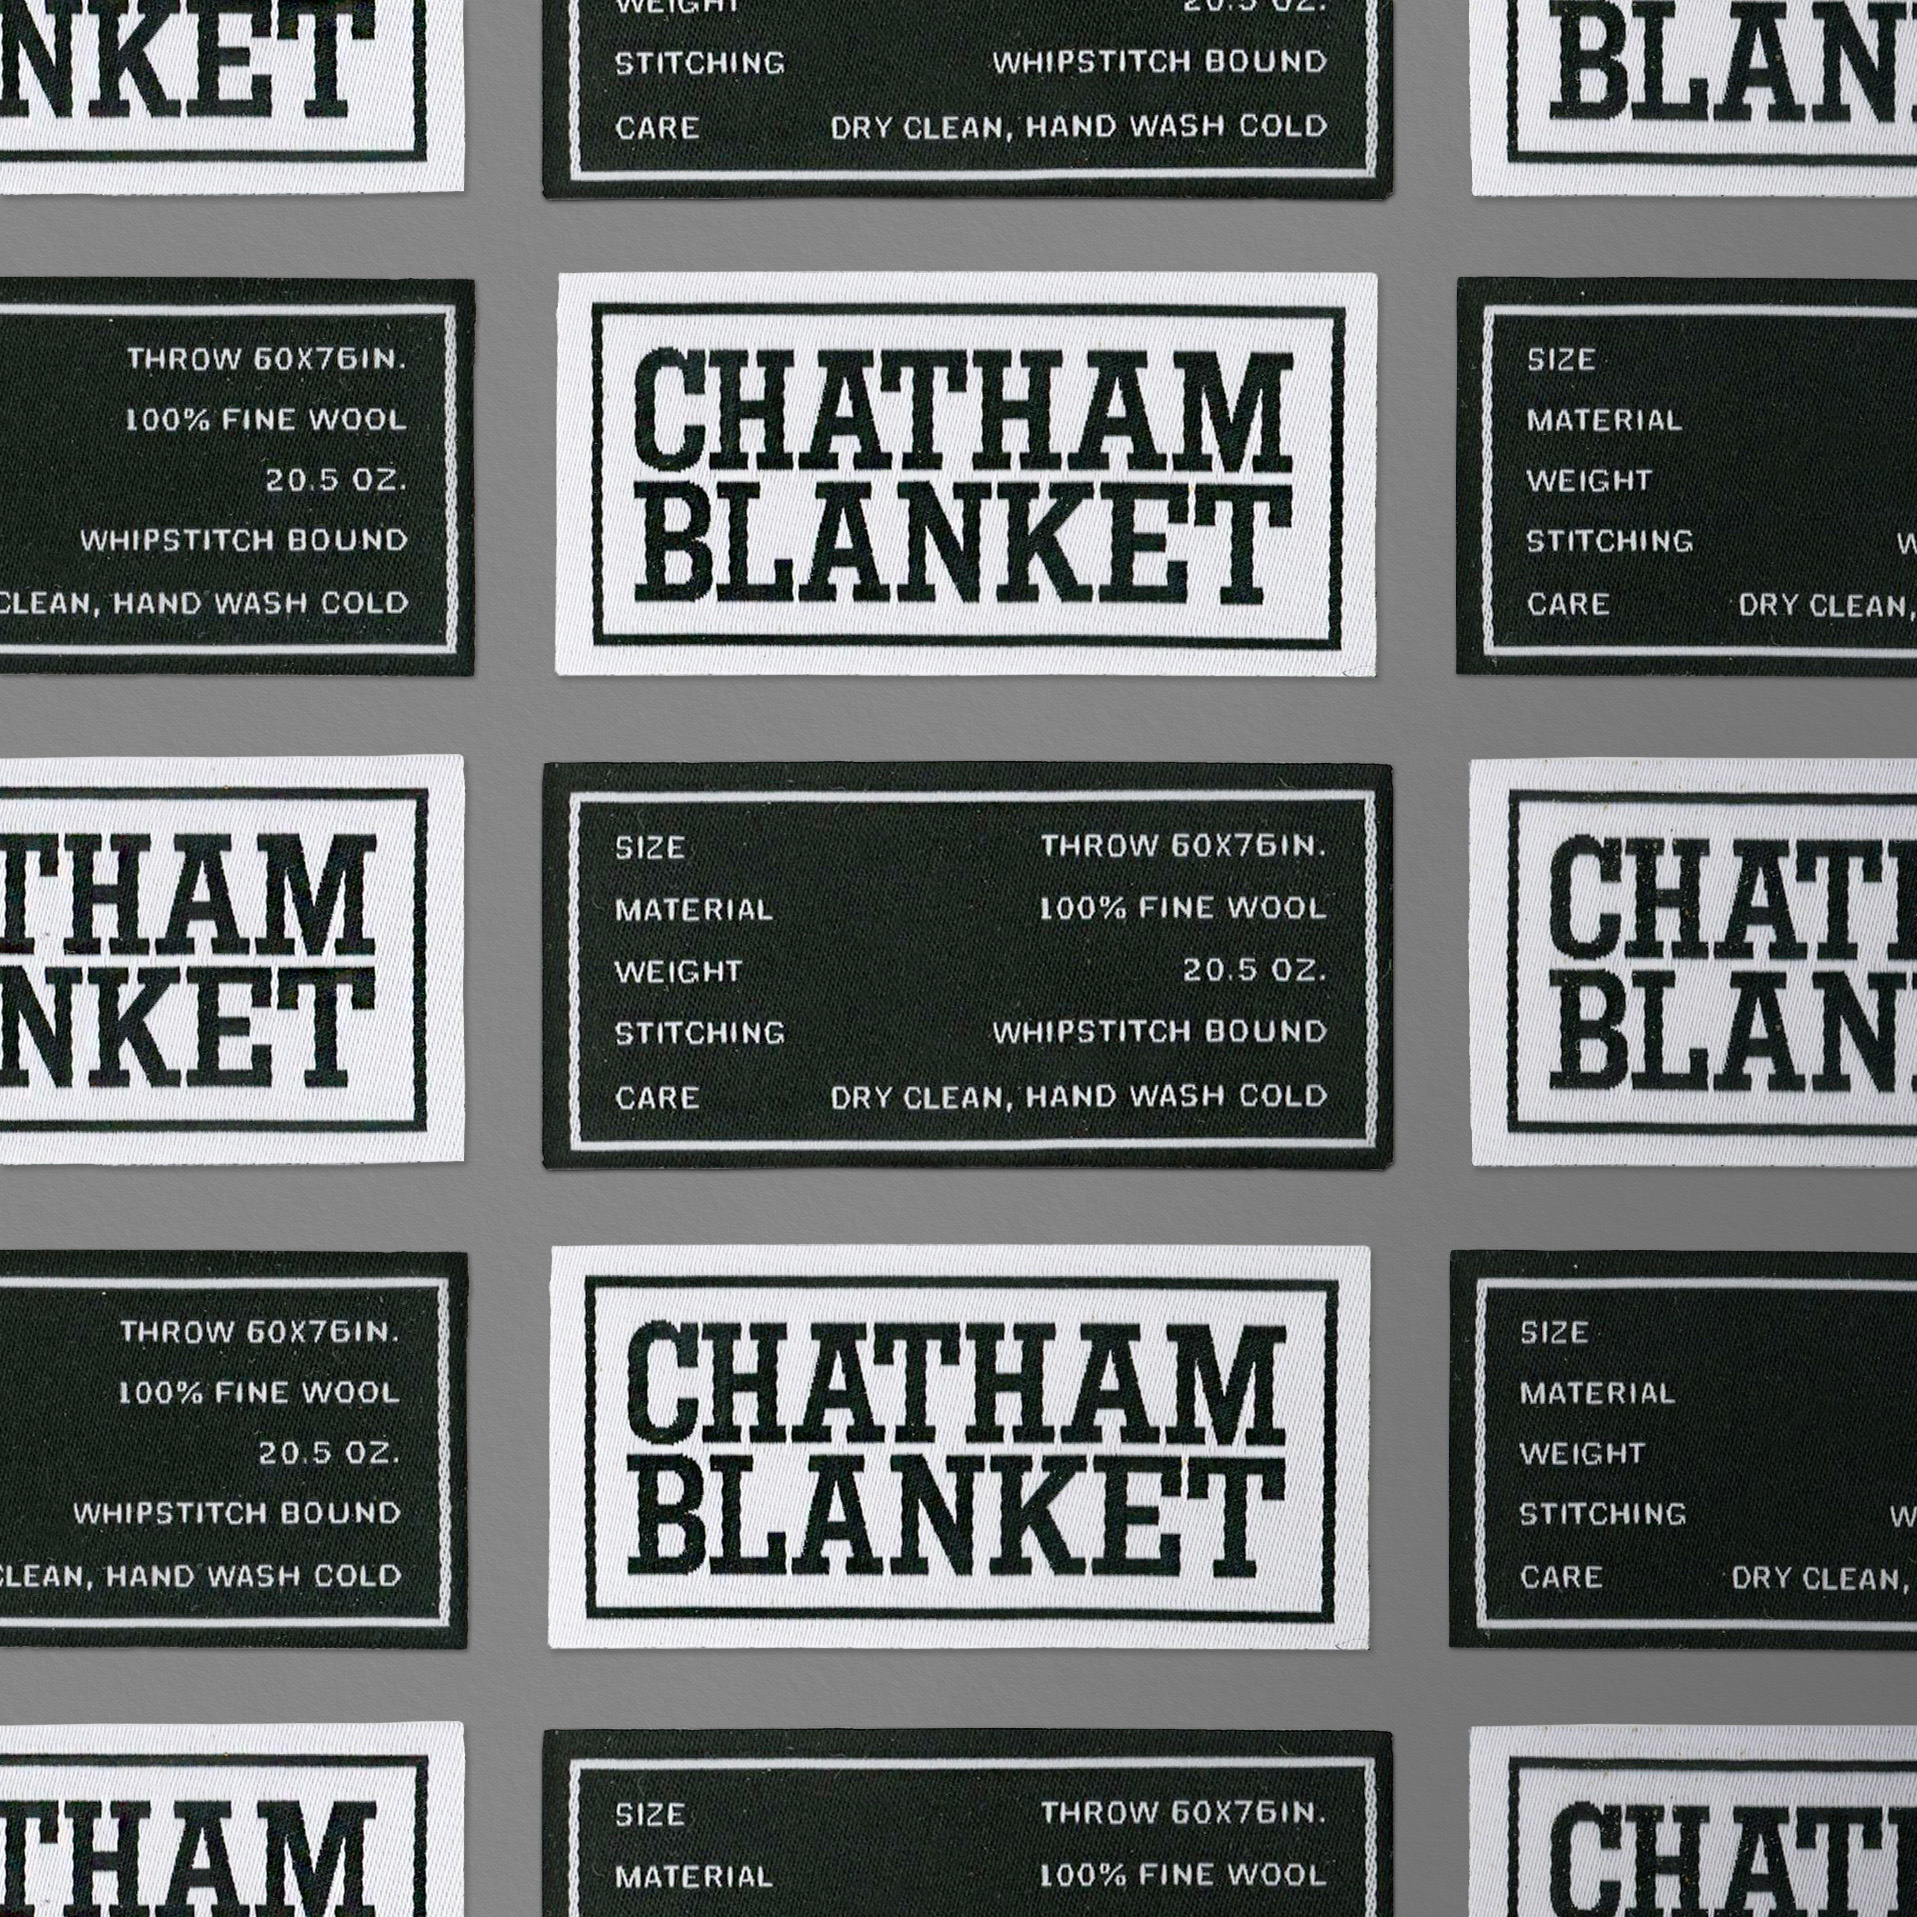 New Logo and Identity for Chatham by Order